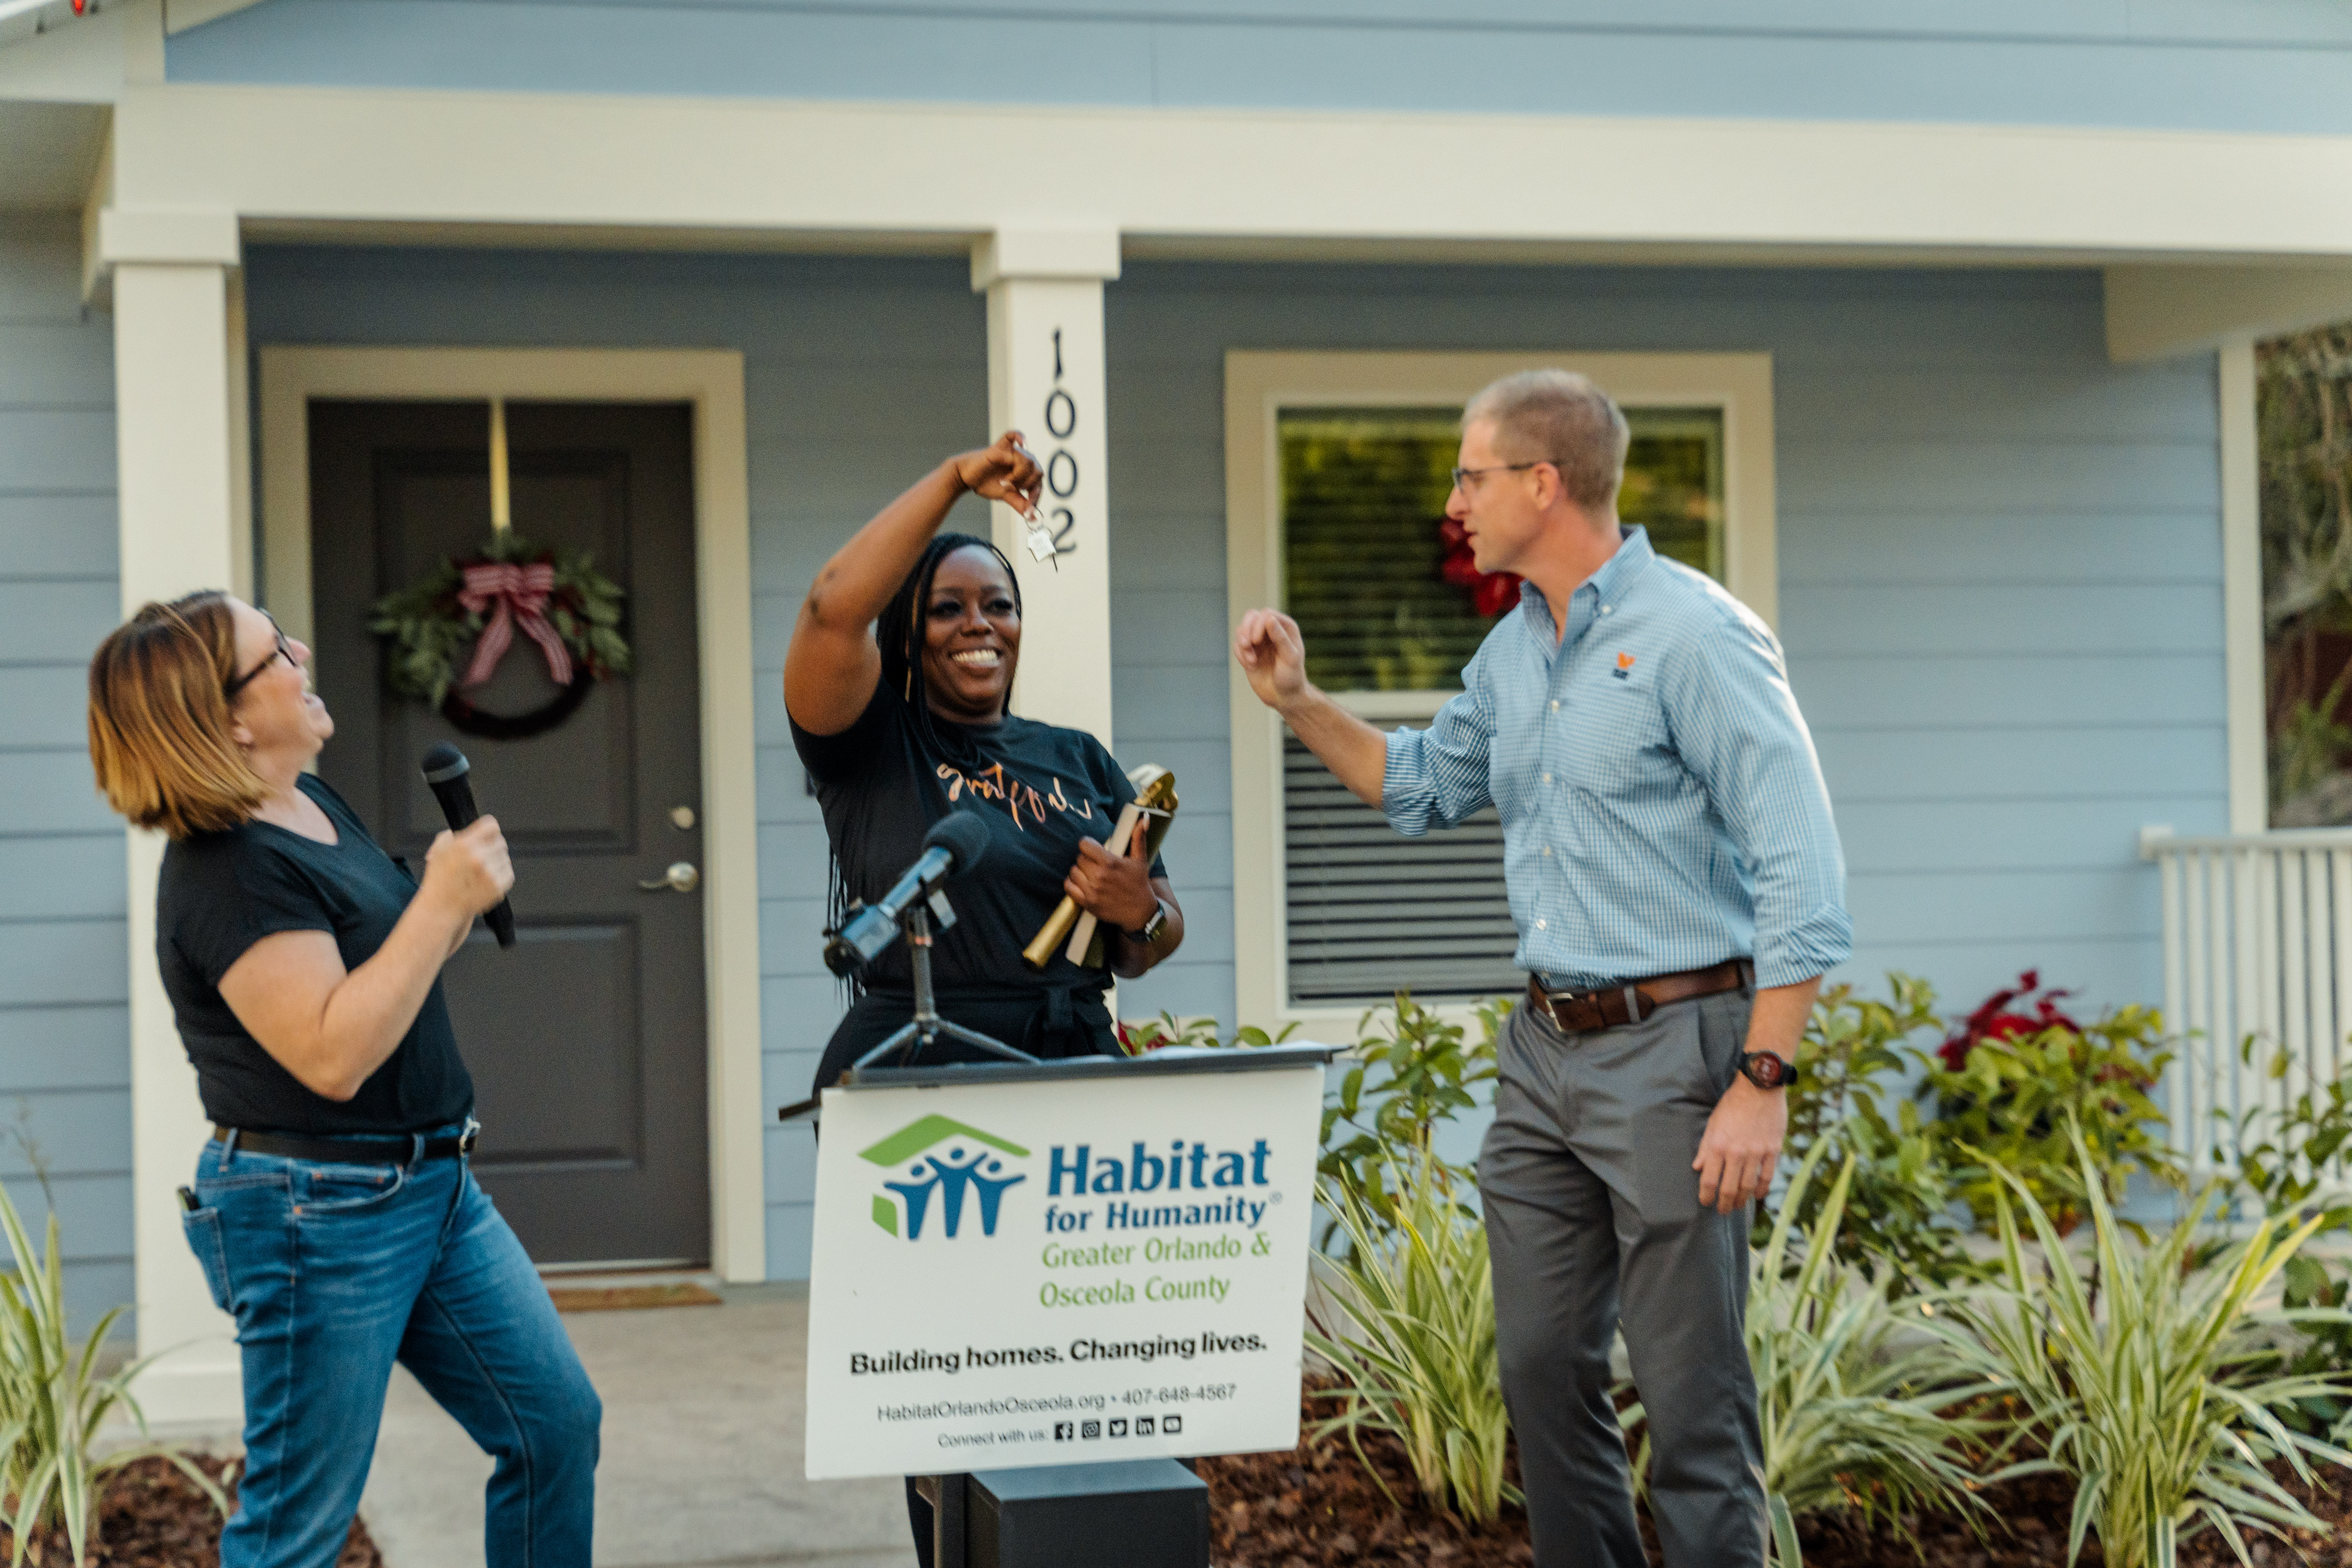 Woman smiling and reaching up to paint siding of house with text overlay "Women Build: A fundraising event" and Habitat Orlando & Osceola logo